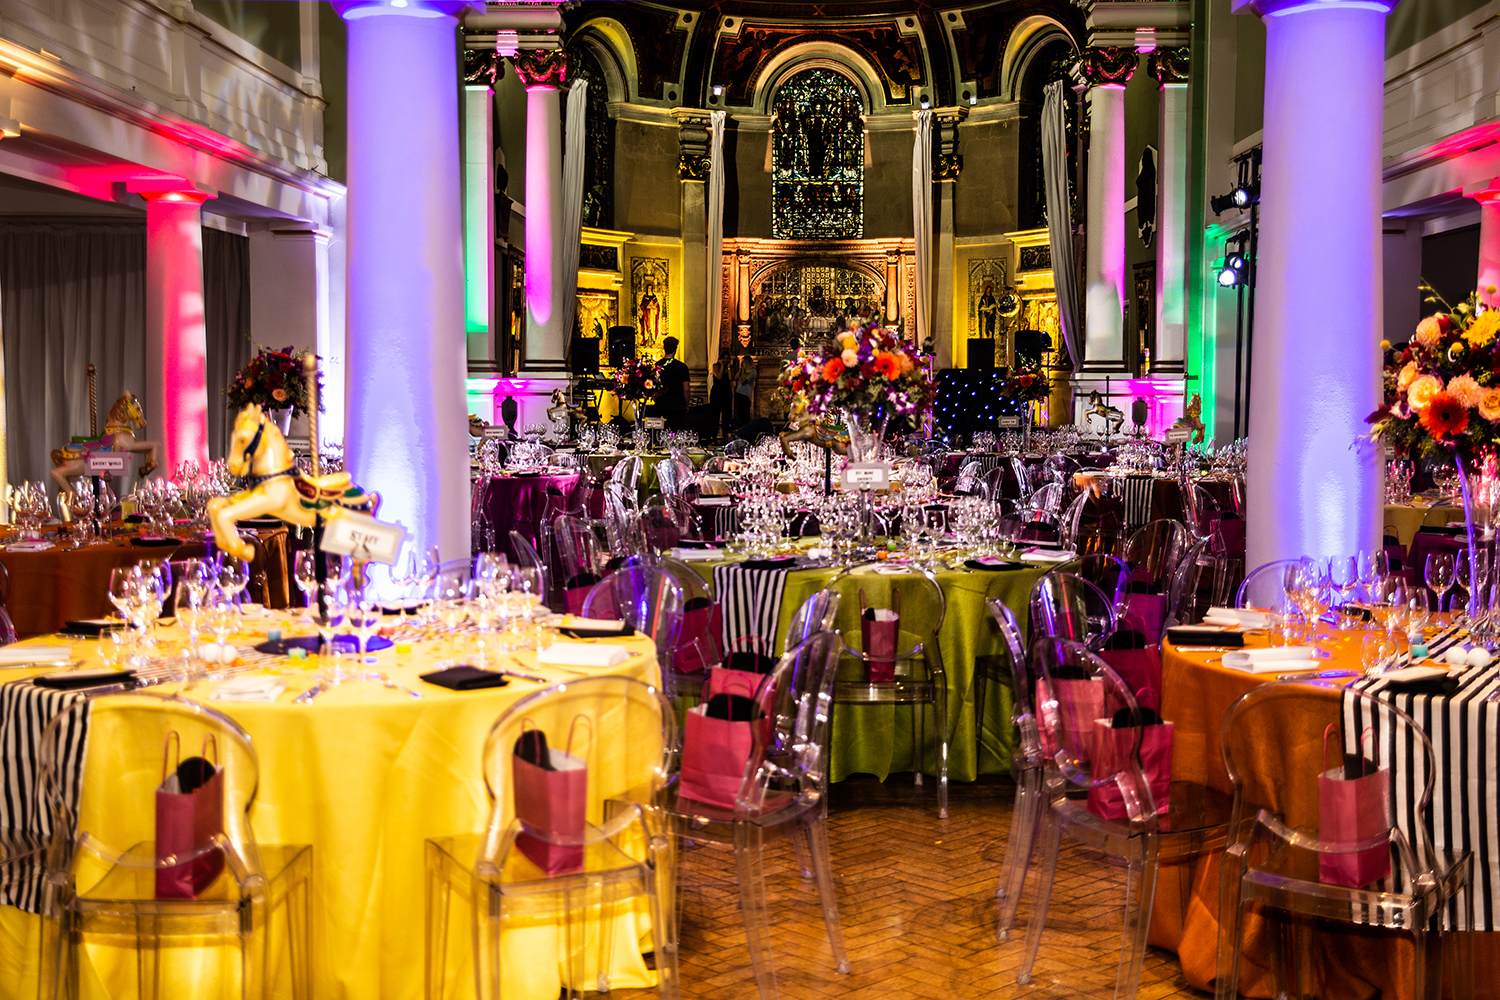 Huge party venue with colourful tables and decor